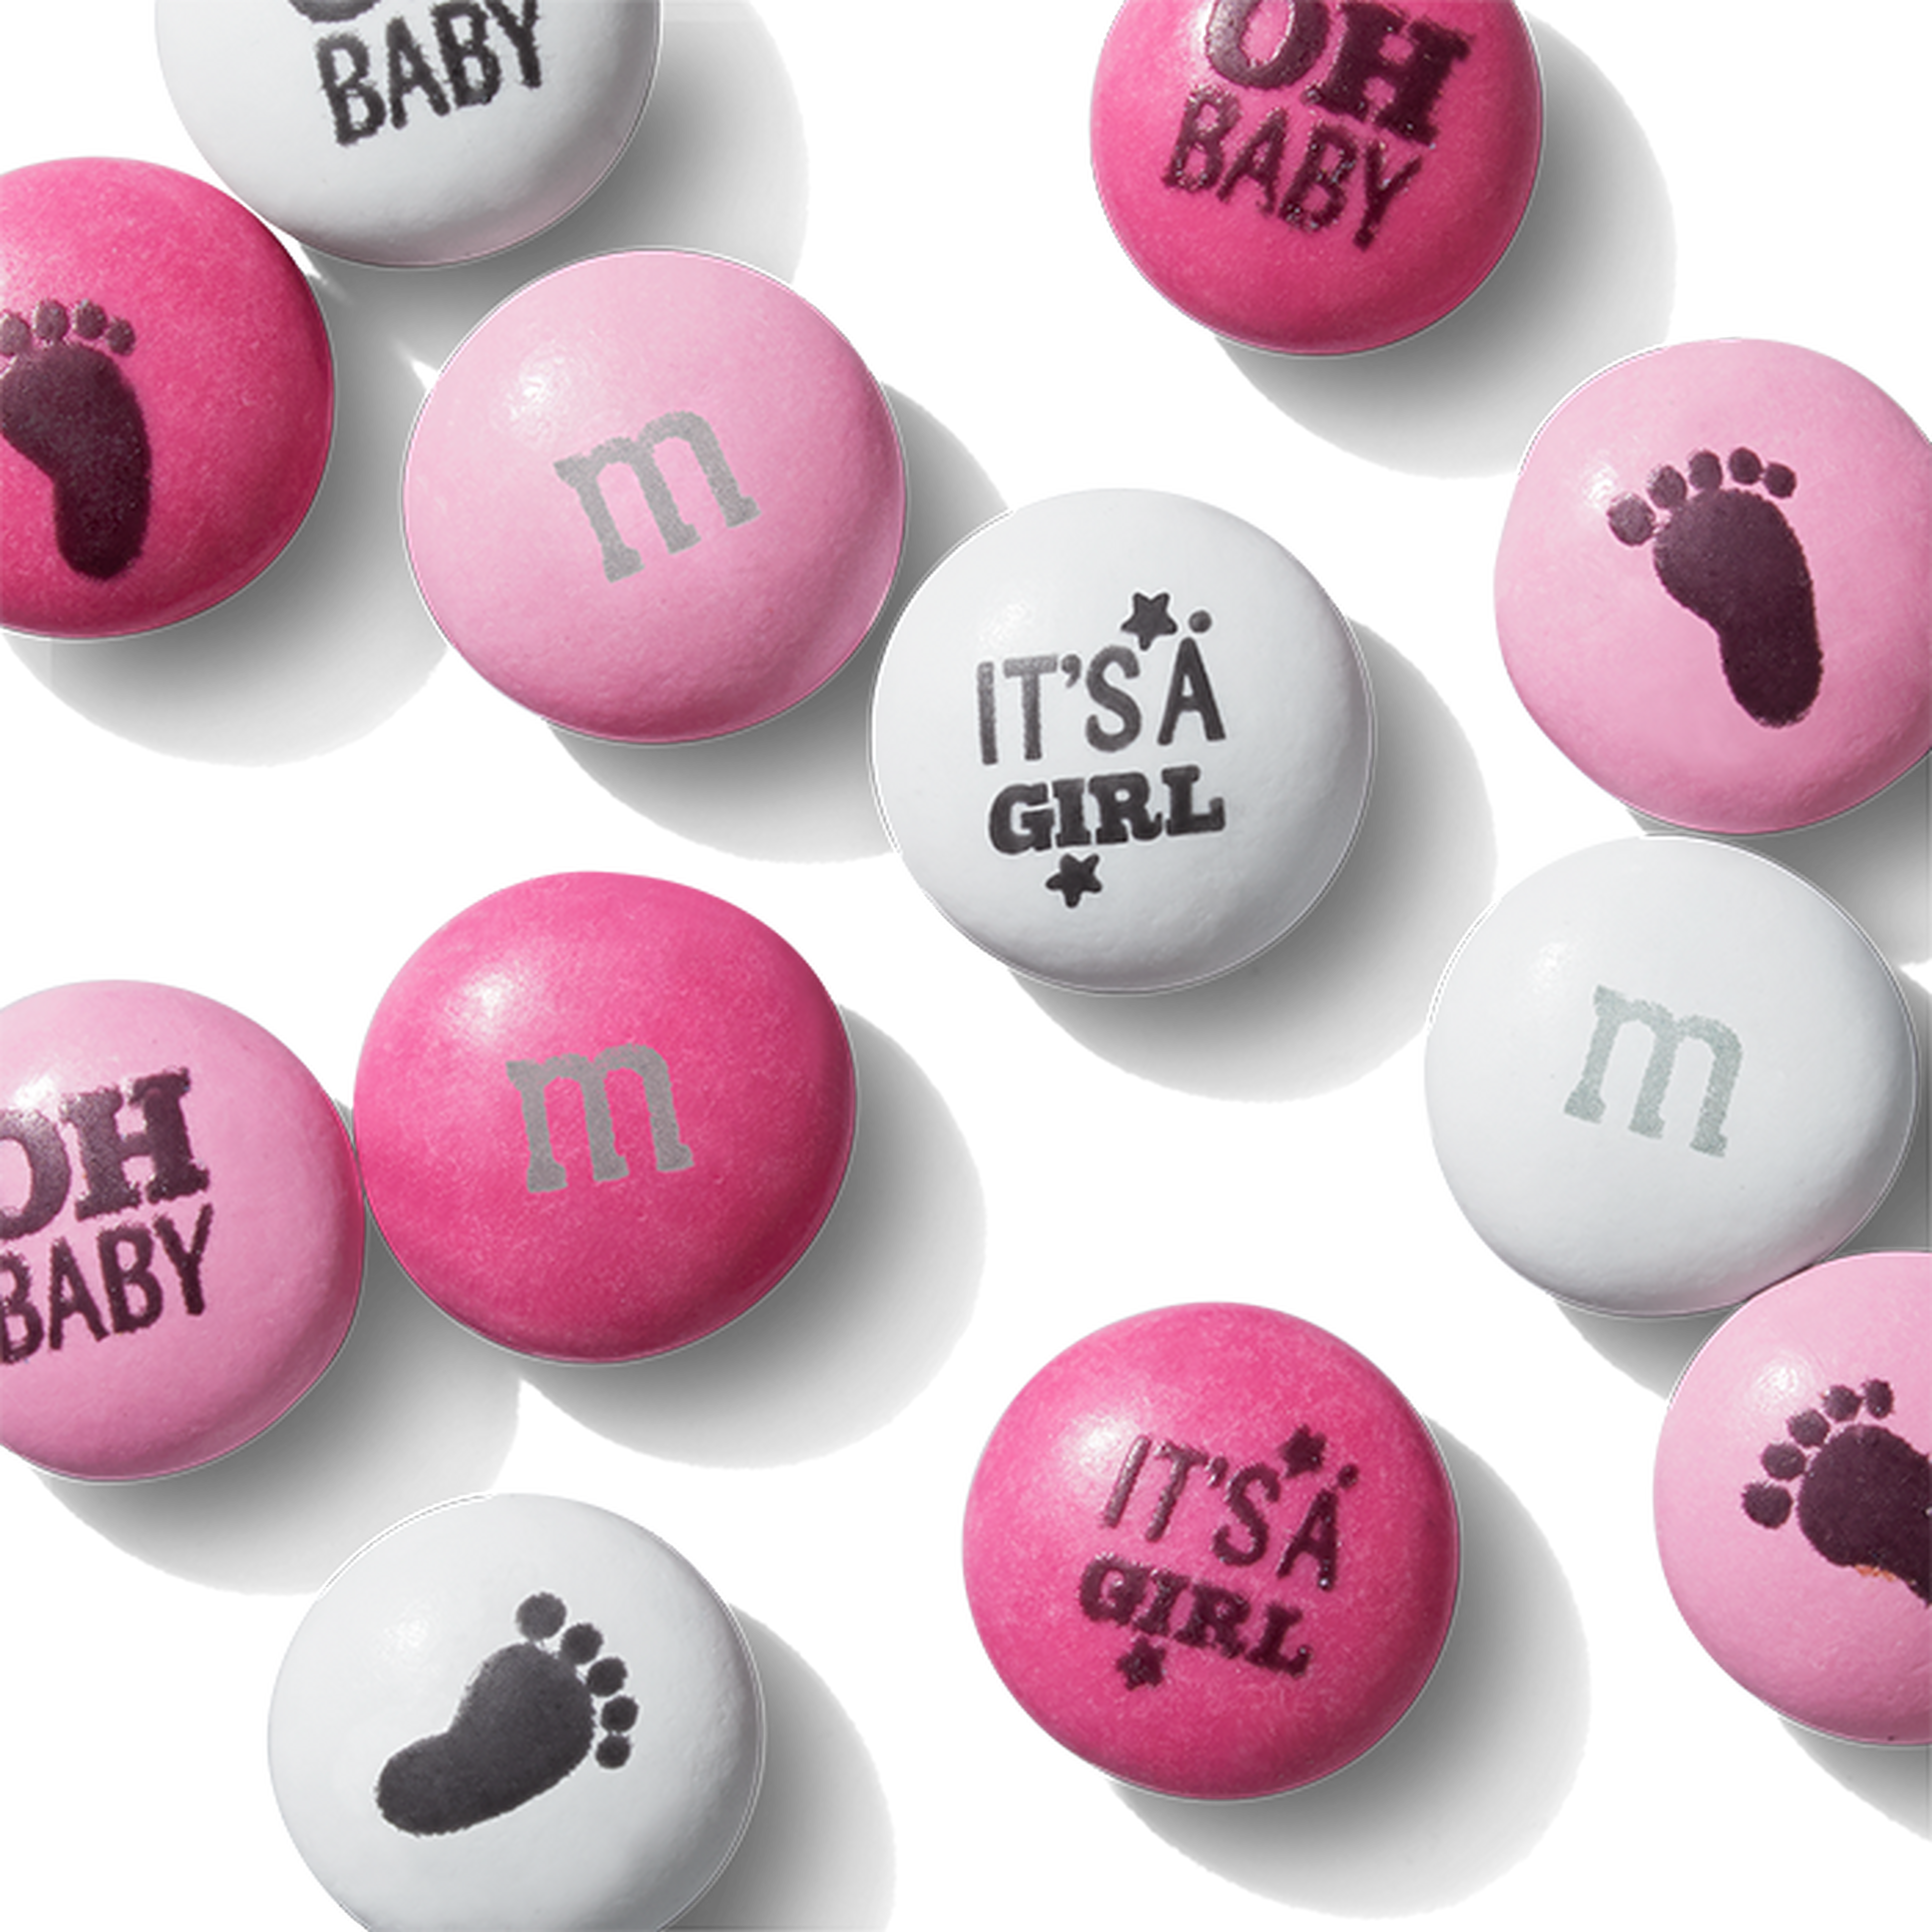 .com : It's a Girl Baby Shower Candy Favors Personalized M&M Fun Size  Bags (24 Pack) - Pink Foil - Fully Assembled Bulk Candy (3x4 in) Favor for  Guests : Grocery & Gourmet Food